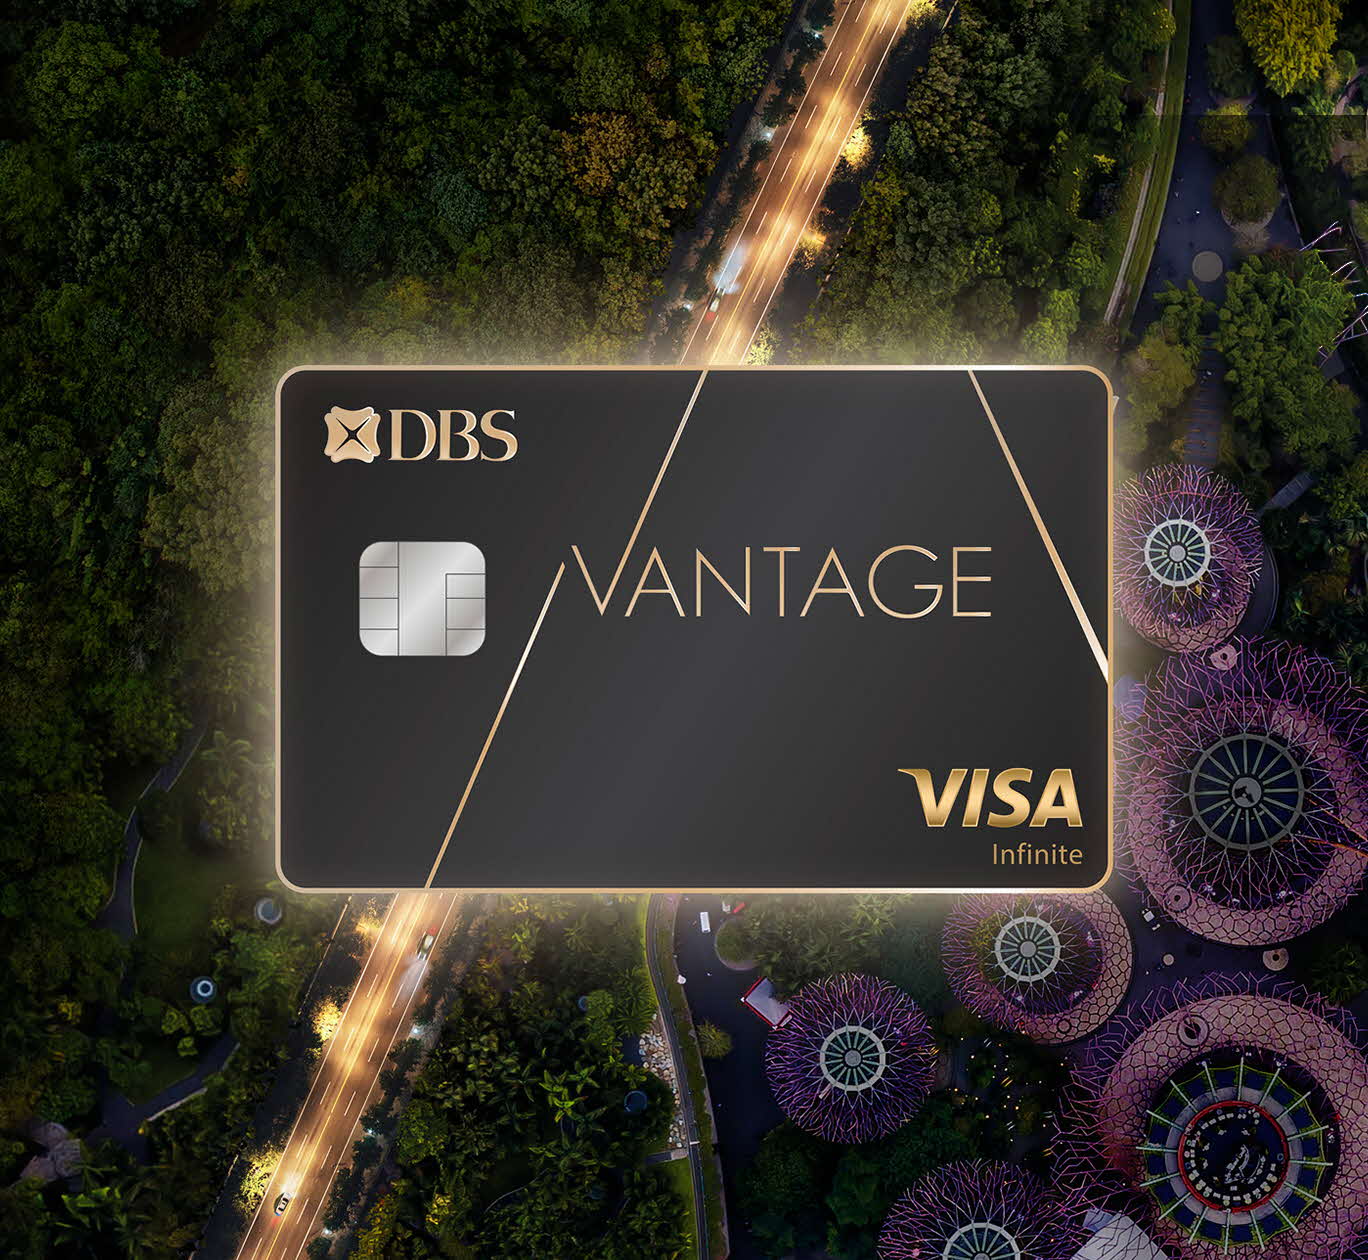 Enjoy up to 80,000 miles when you sign up for DBS Vantage Card by 17 March 2023